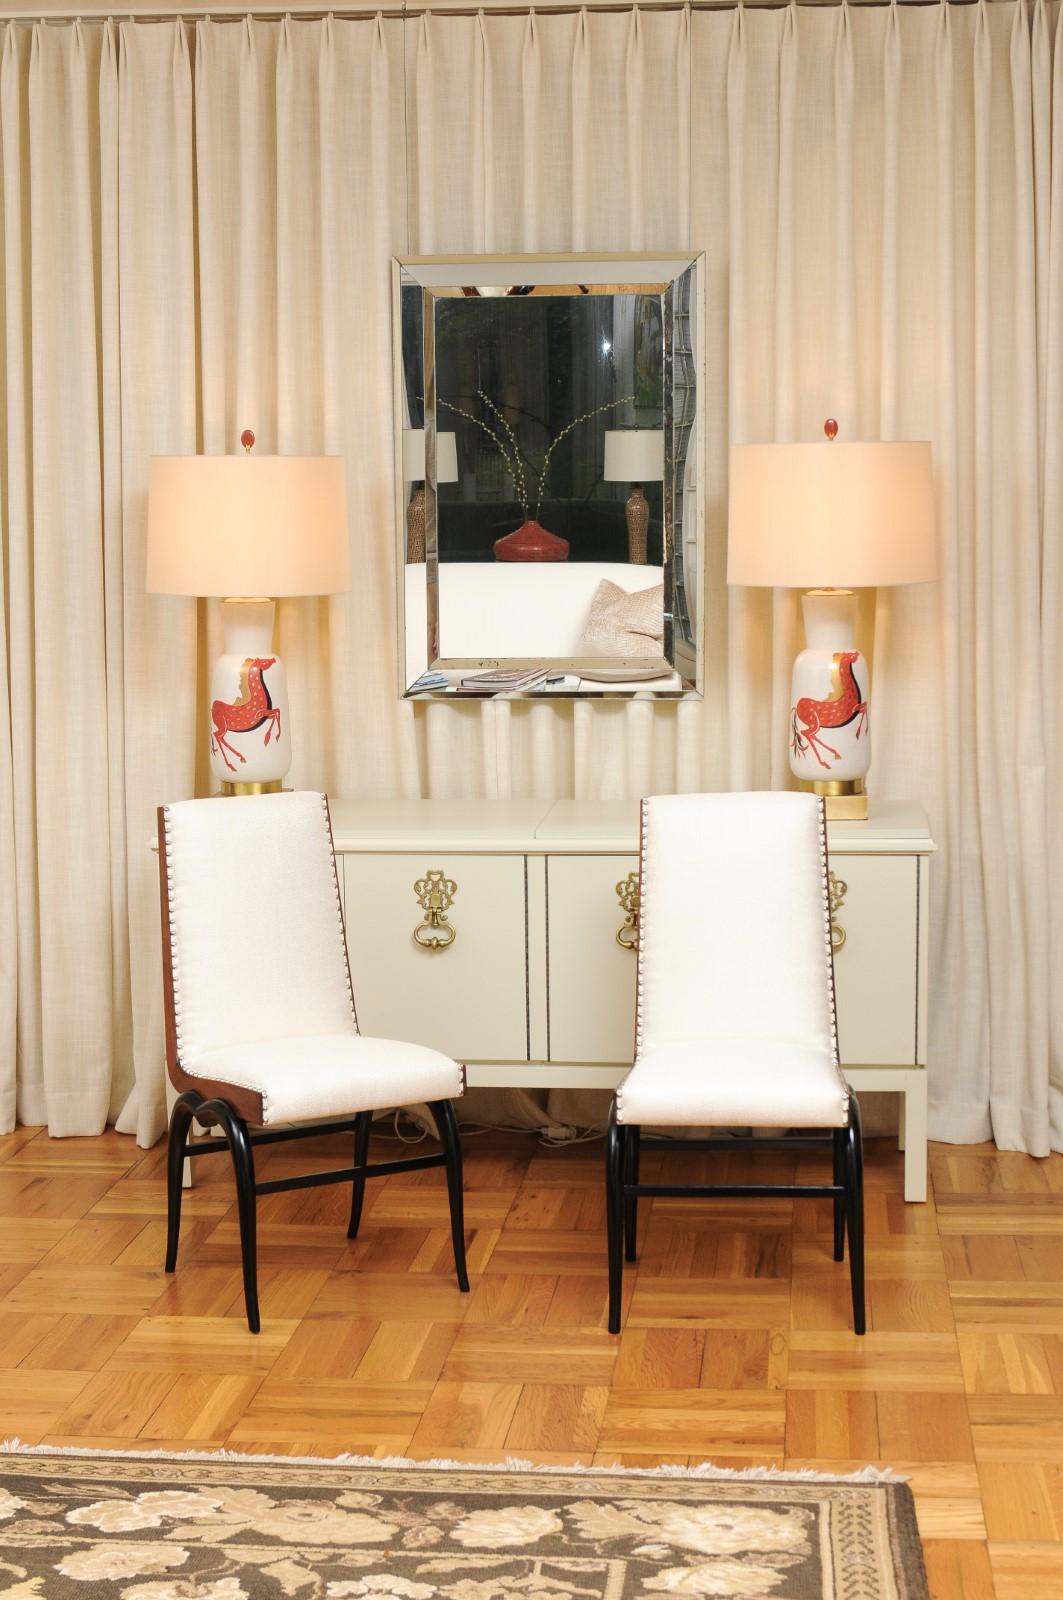 These magnificent dining chairs are shipped as professionally photographed and described in the listing narrative, completely installation ready. This large set is unique on the World market. Expert custom upholstery service is available.

A